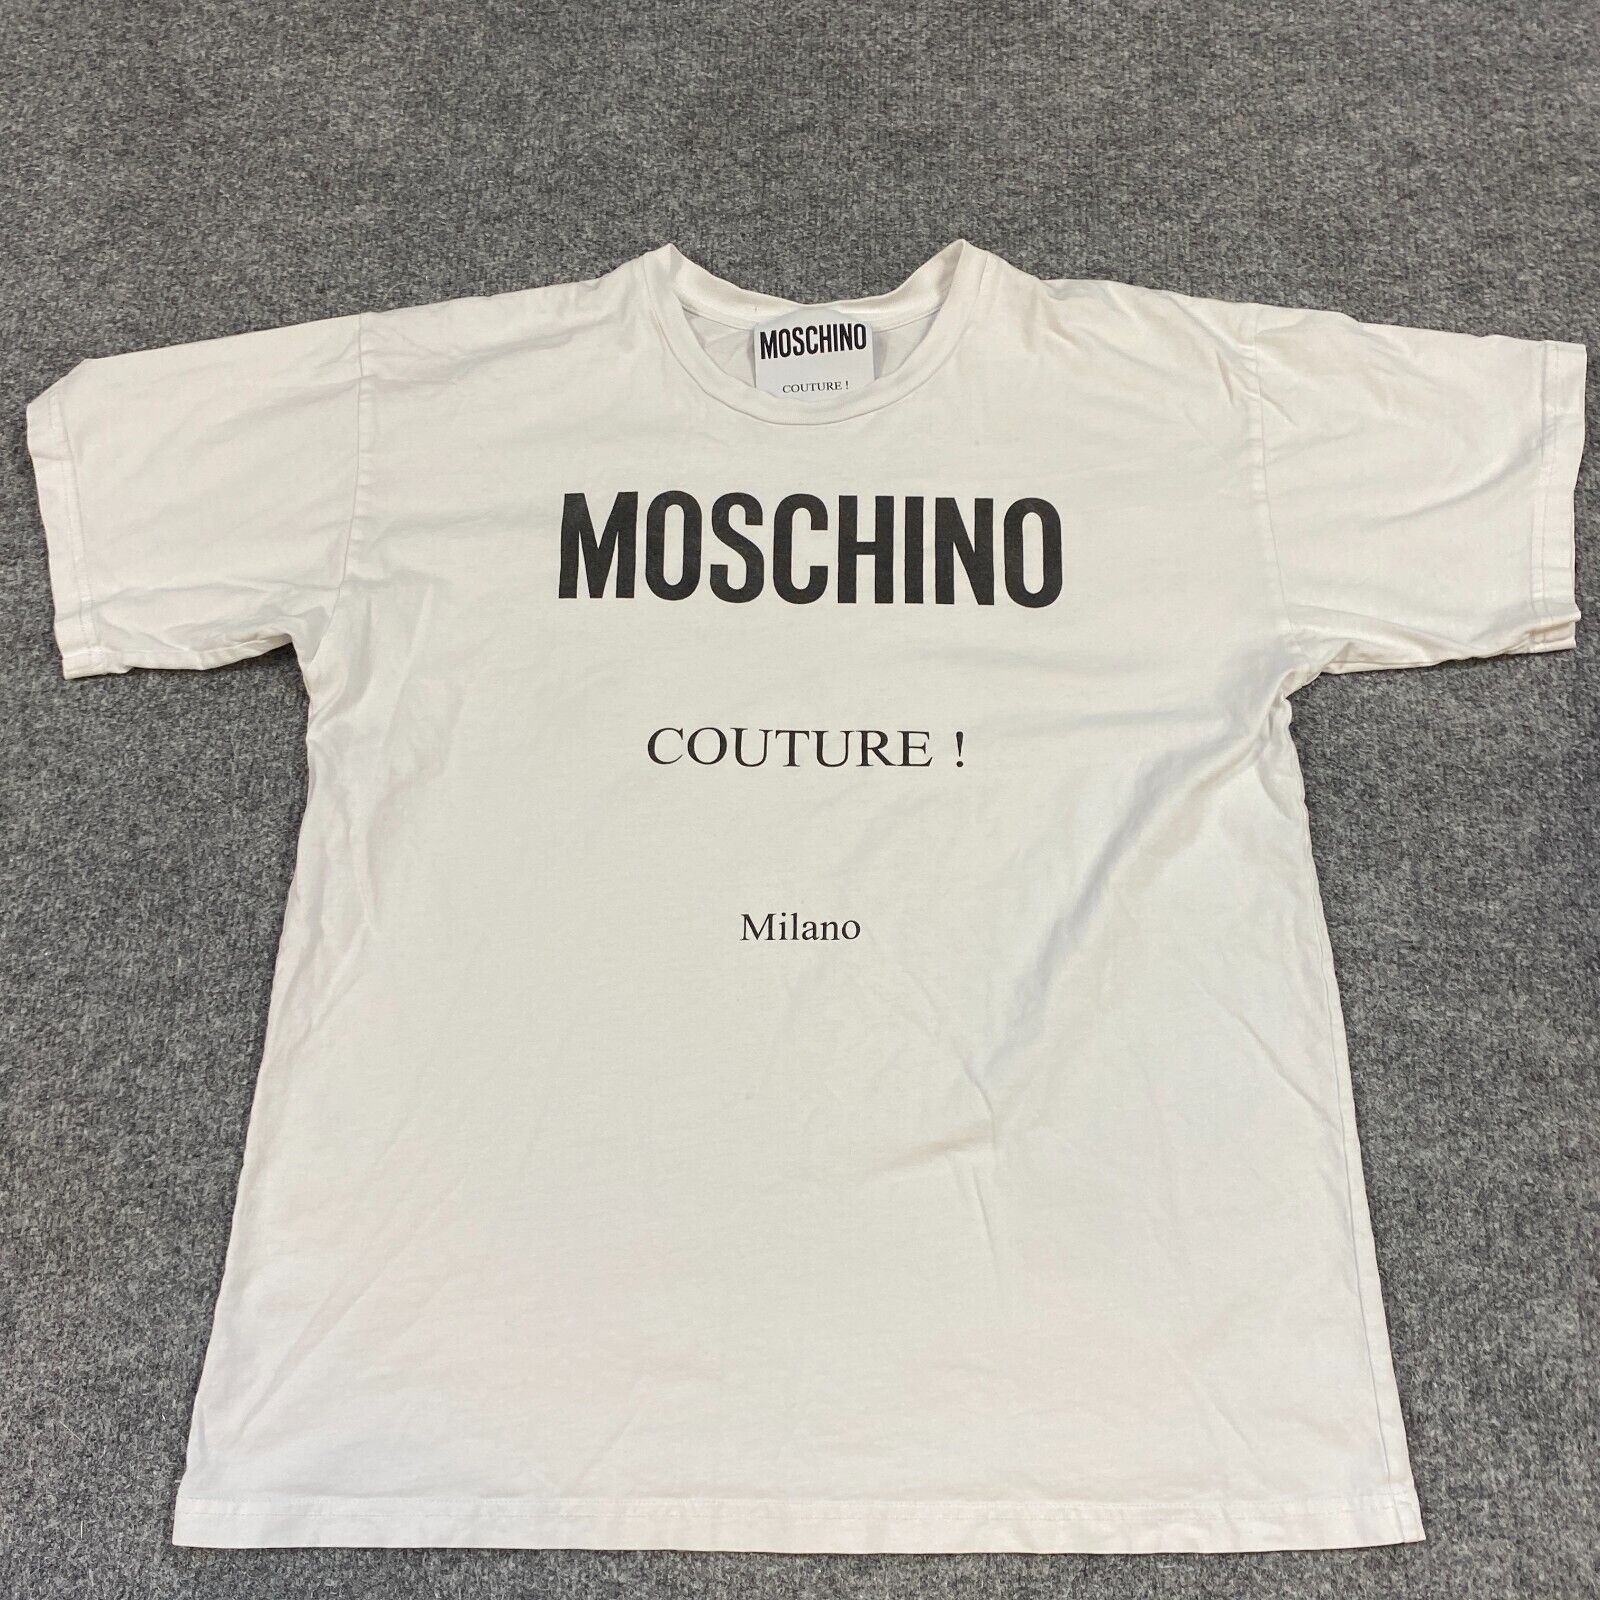 Moschino Couture T-shirt S White Spellout